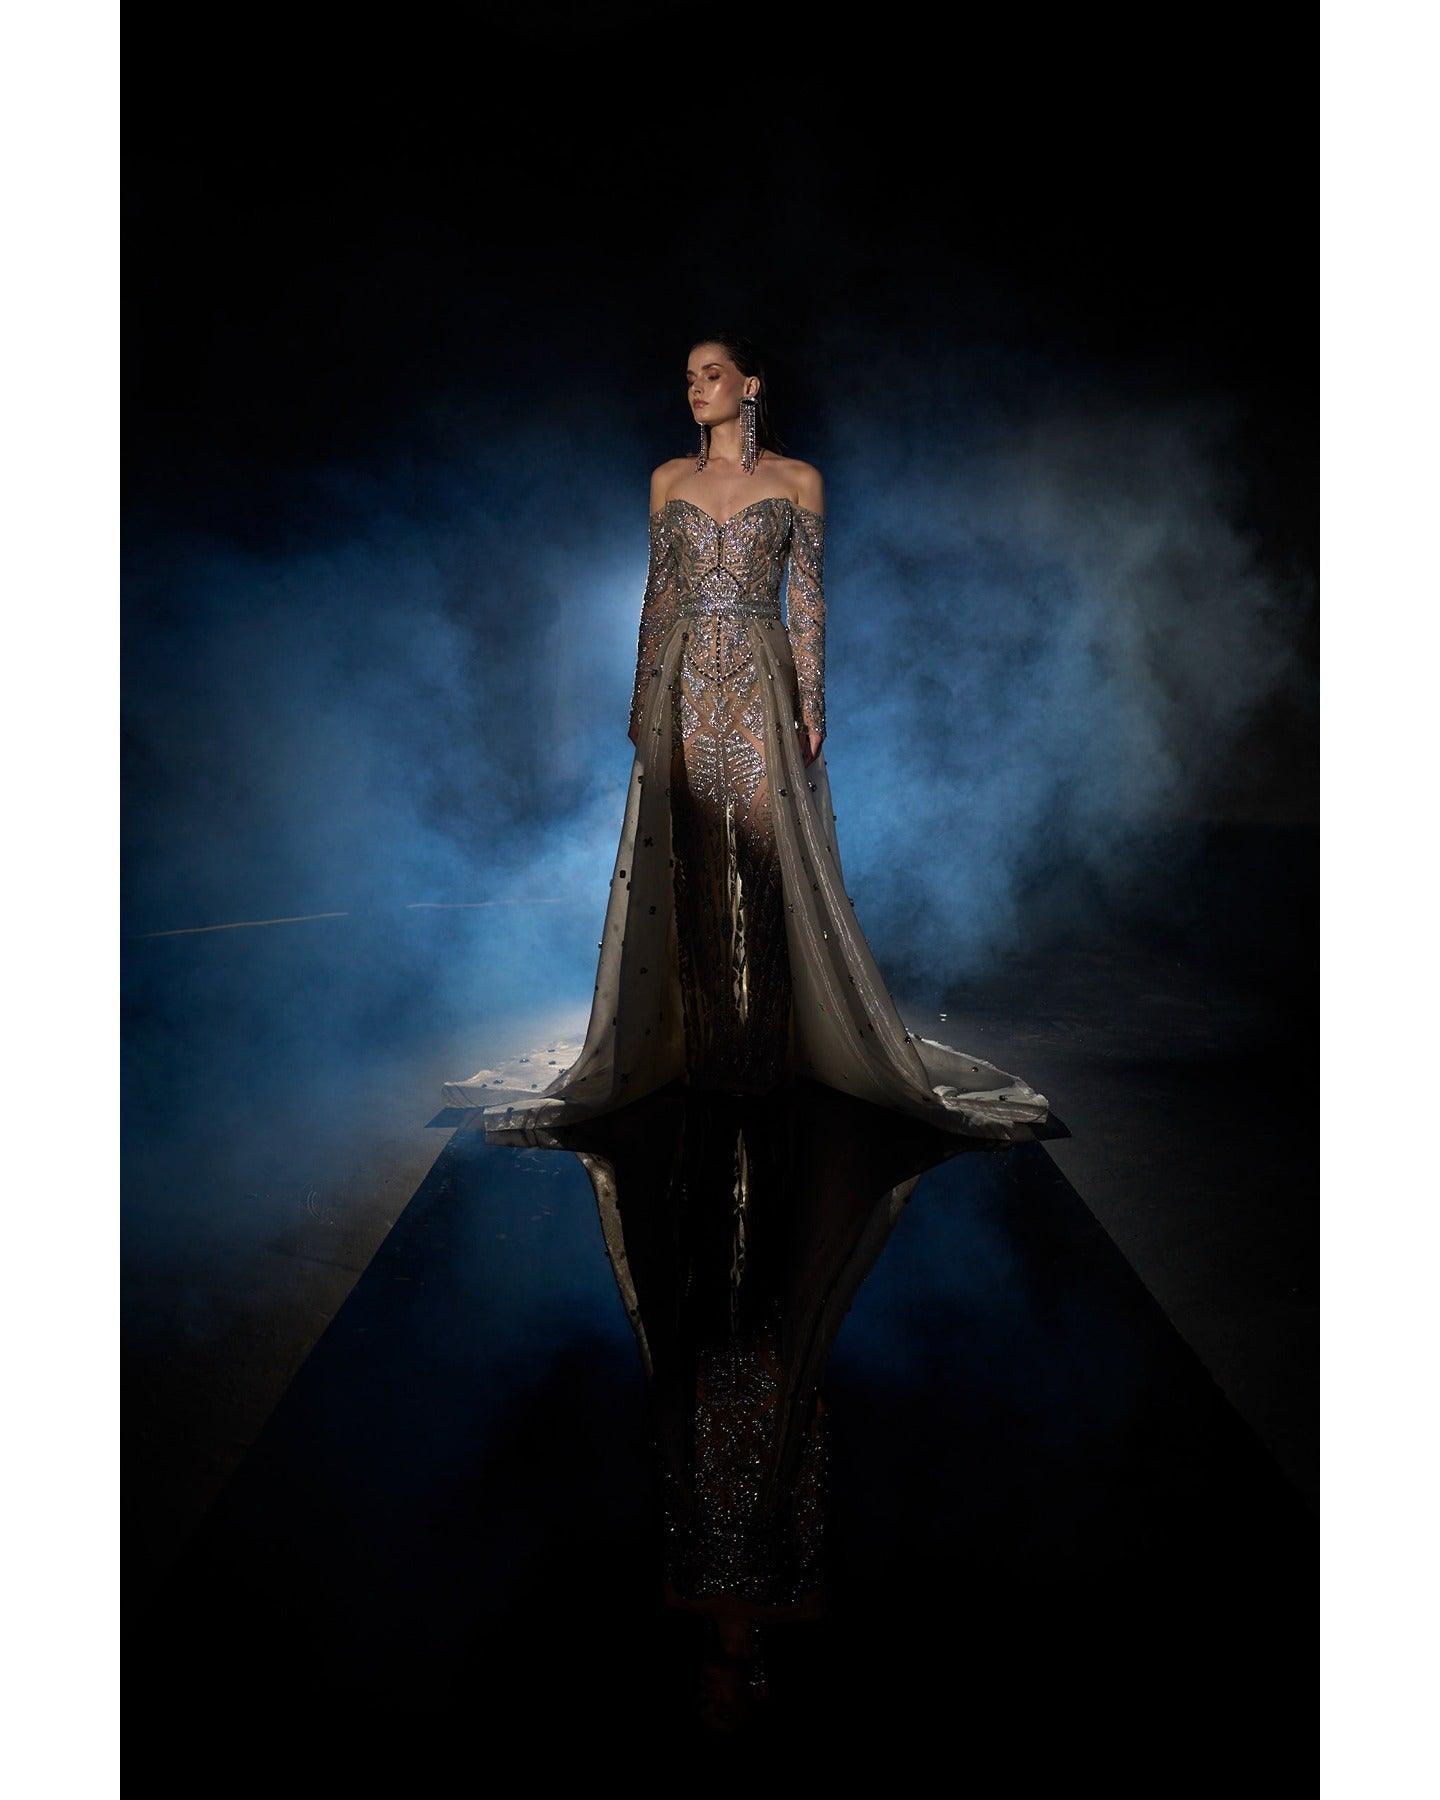 Ethereal Elegance: Bora Honey's Signature Indian Bridal gown Designs for Timeless Weddings